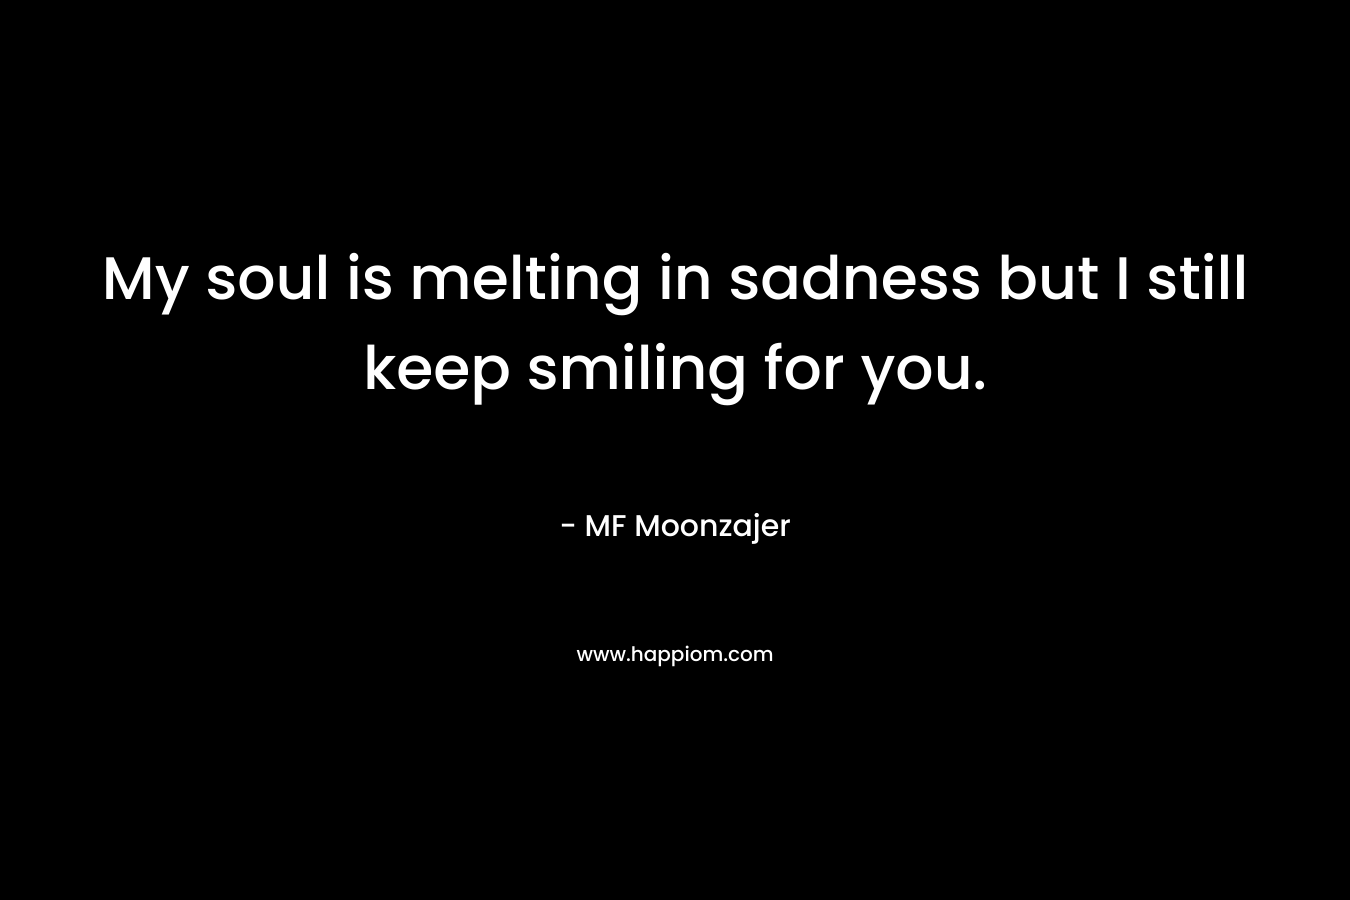 My soul is melting in sadness but I still keep smiling for you.